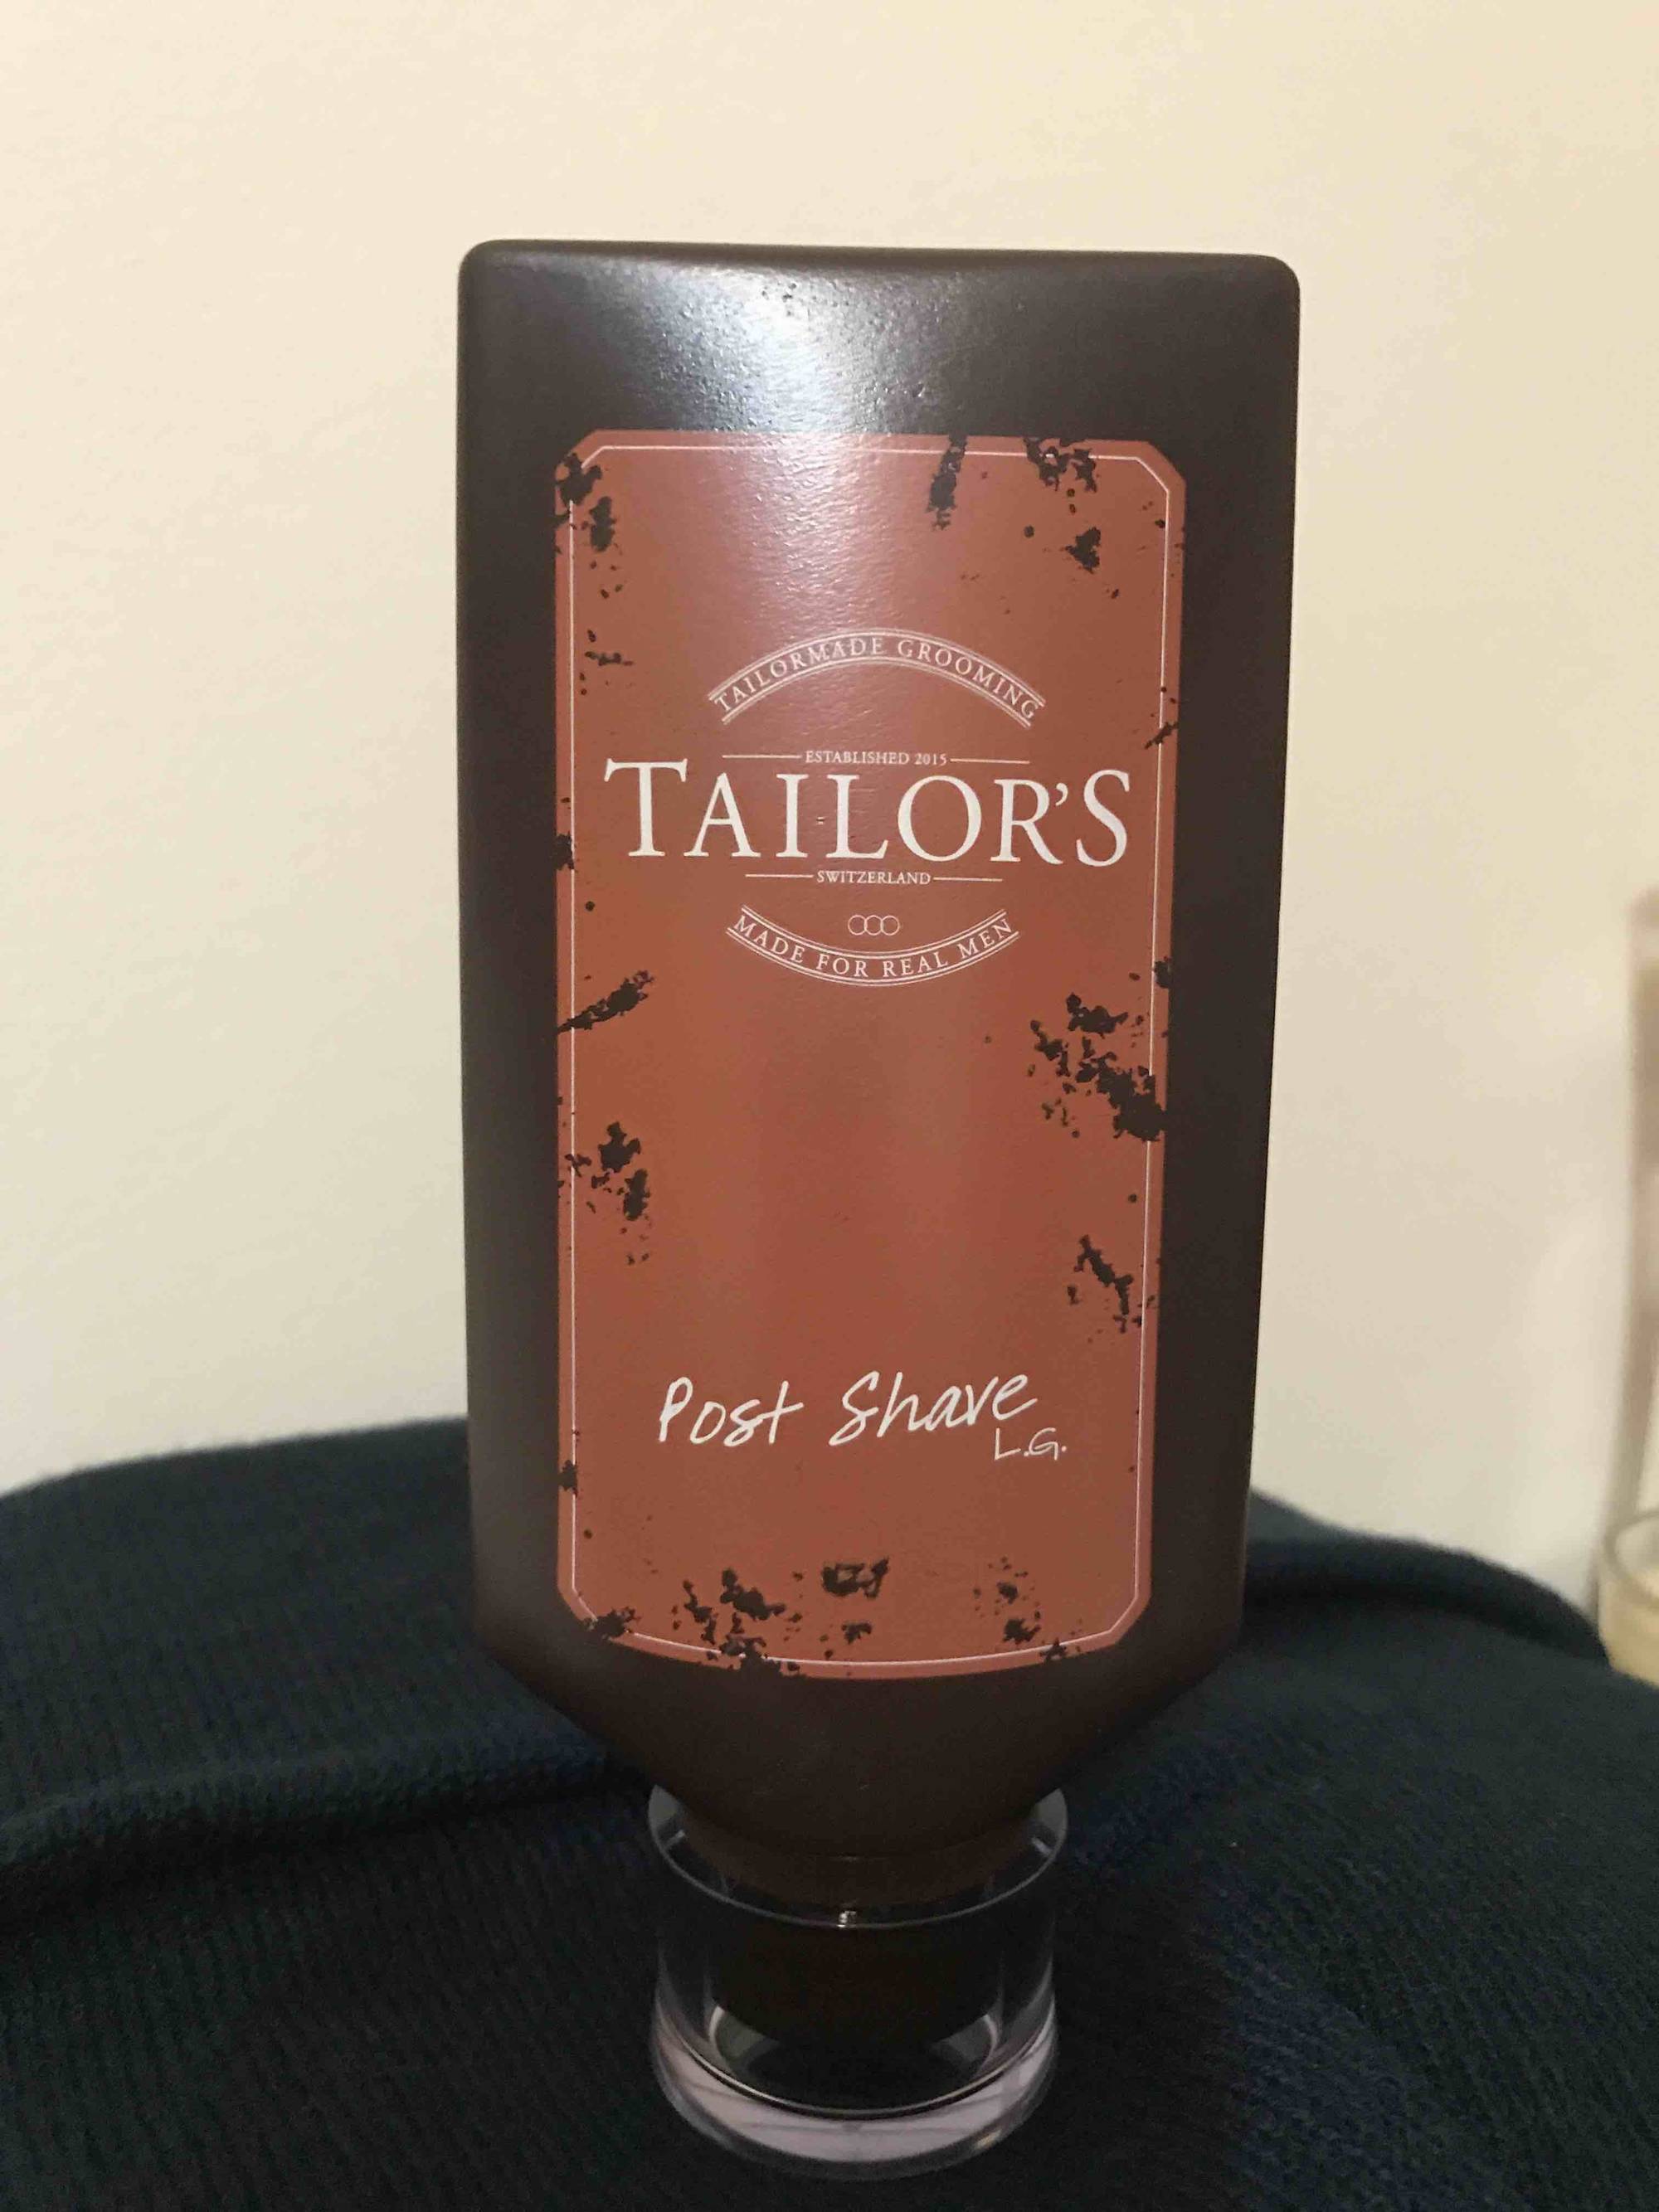 TAILOR'S - Post shave